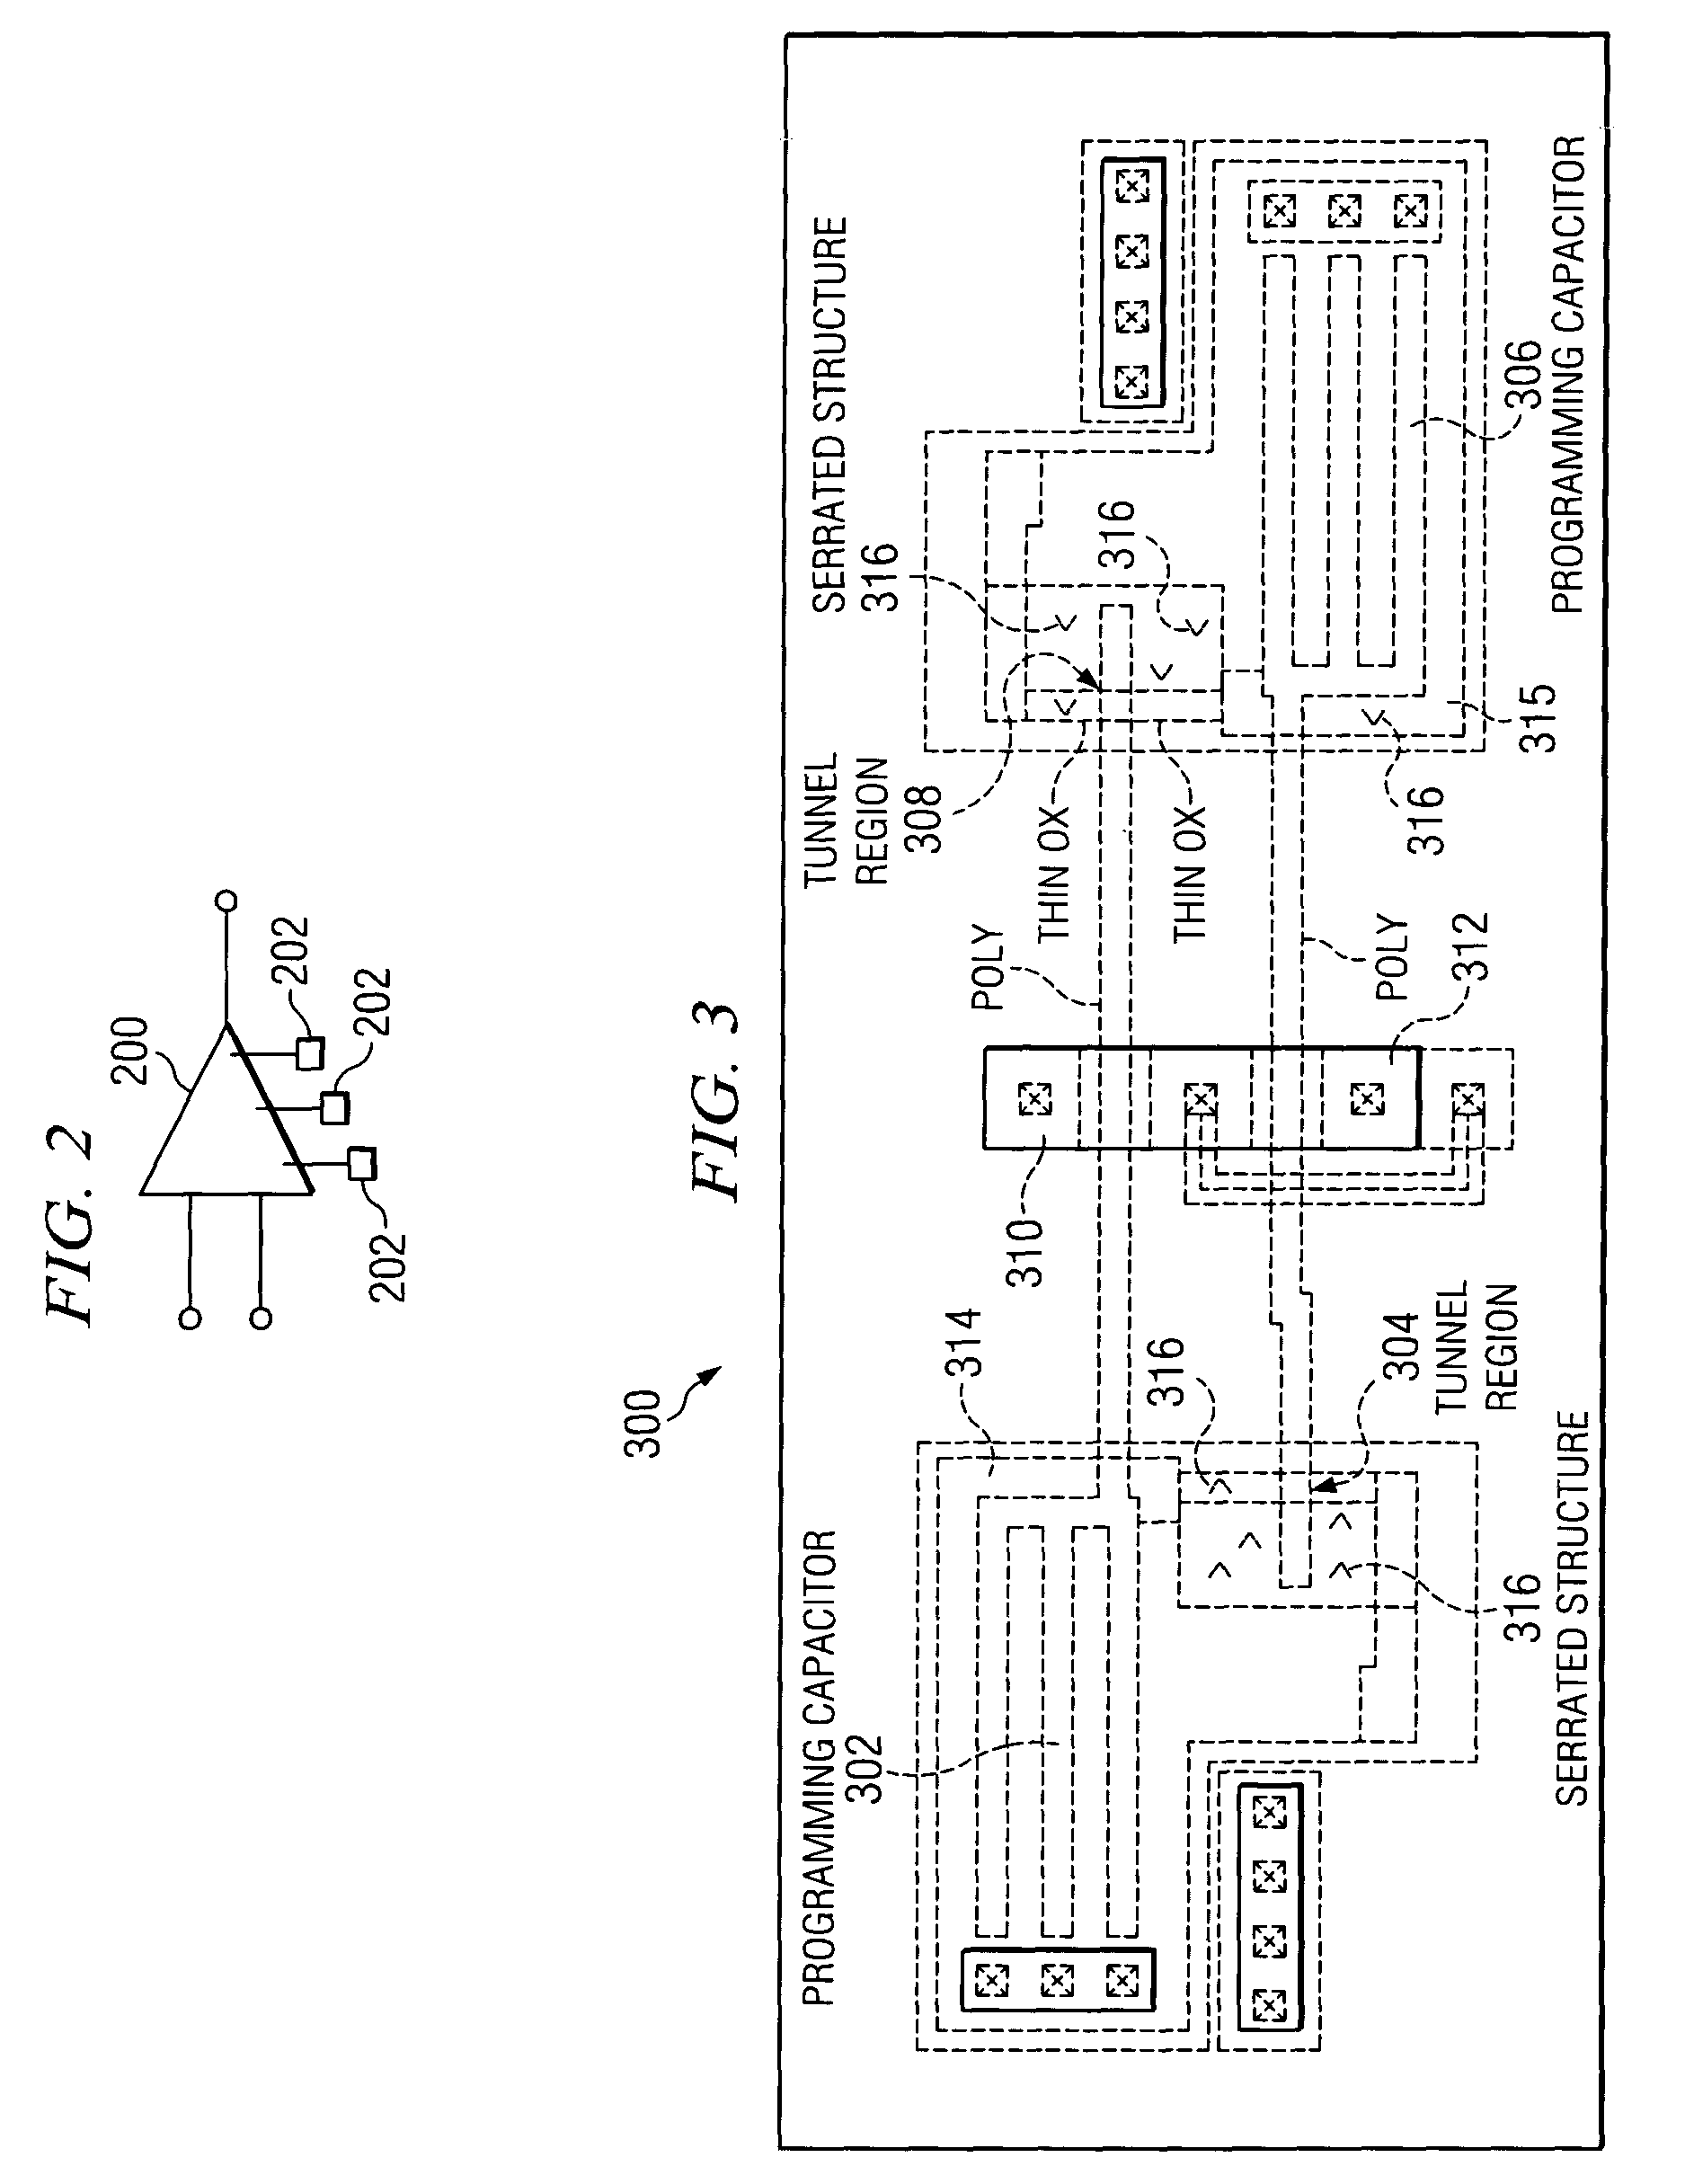 EEPROM device and method for providing lower programming voltage